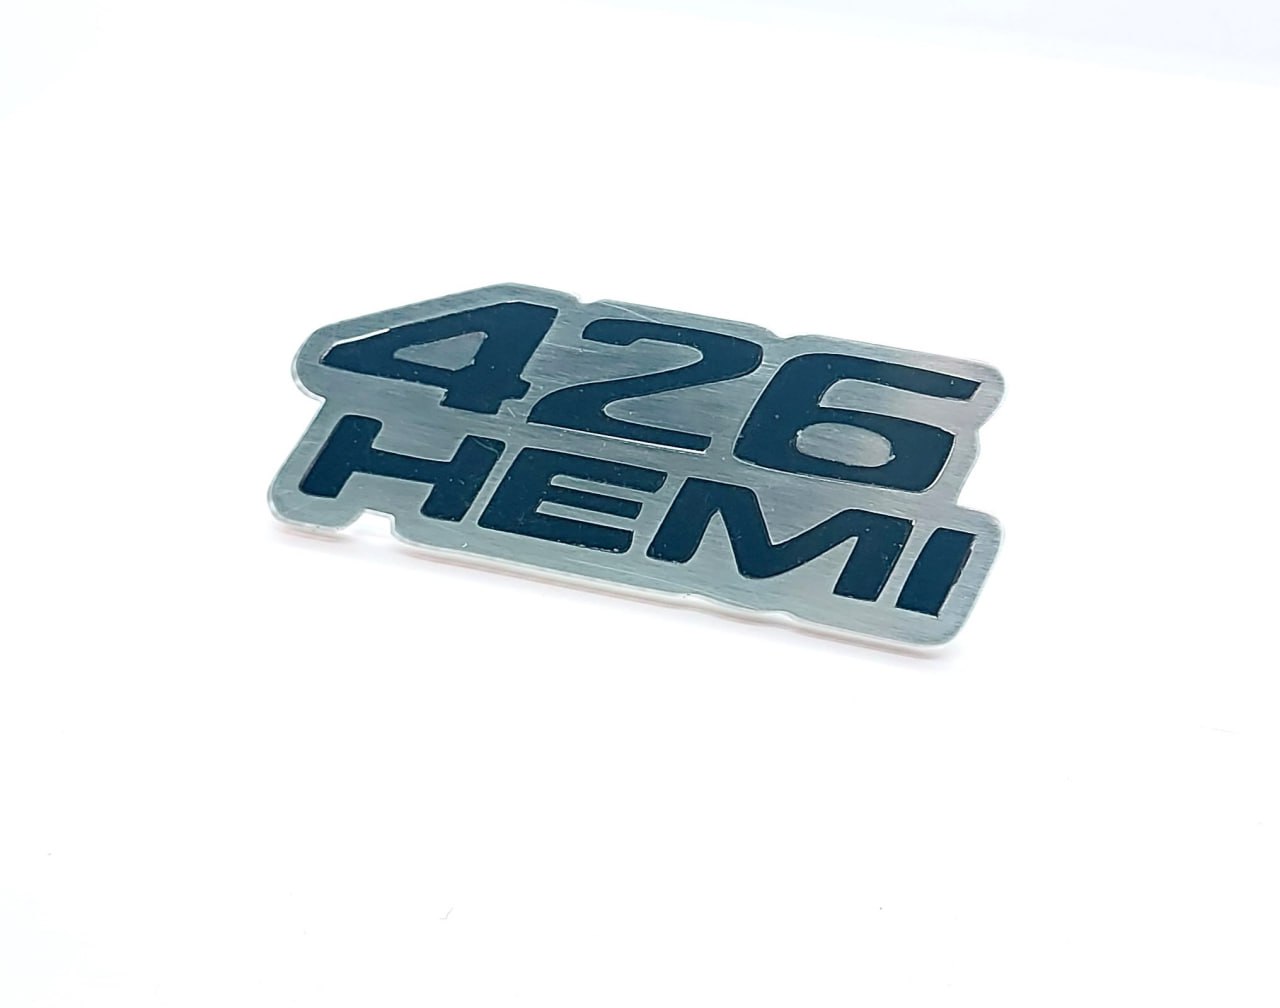 DODGE Stainless Steel Radiator grille emblem with 426HEMI logo - decoinfabric